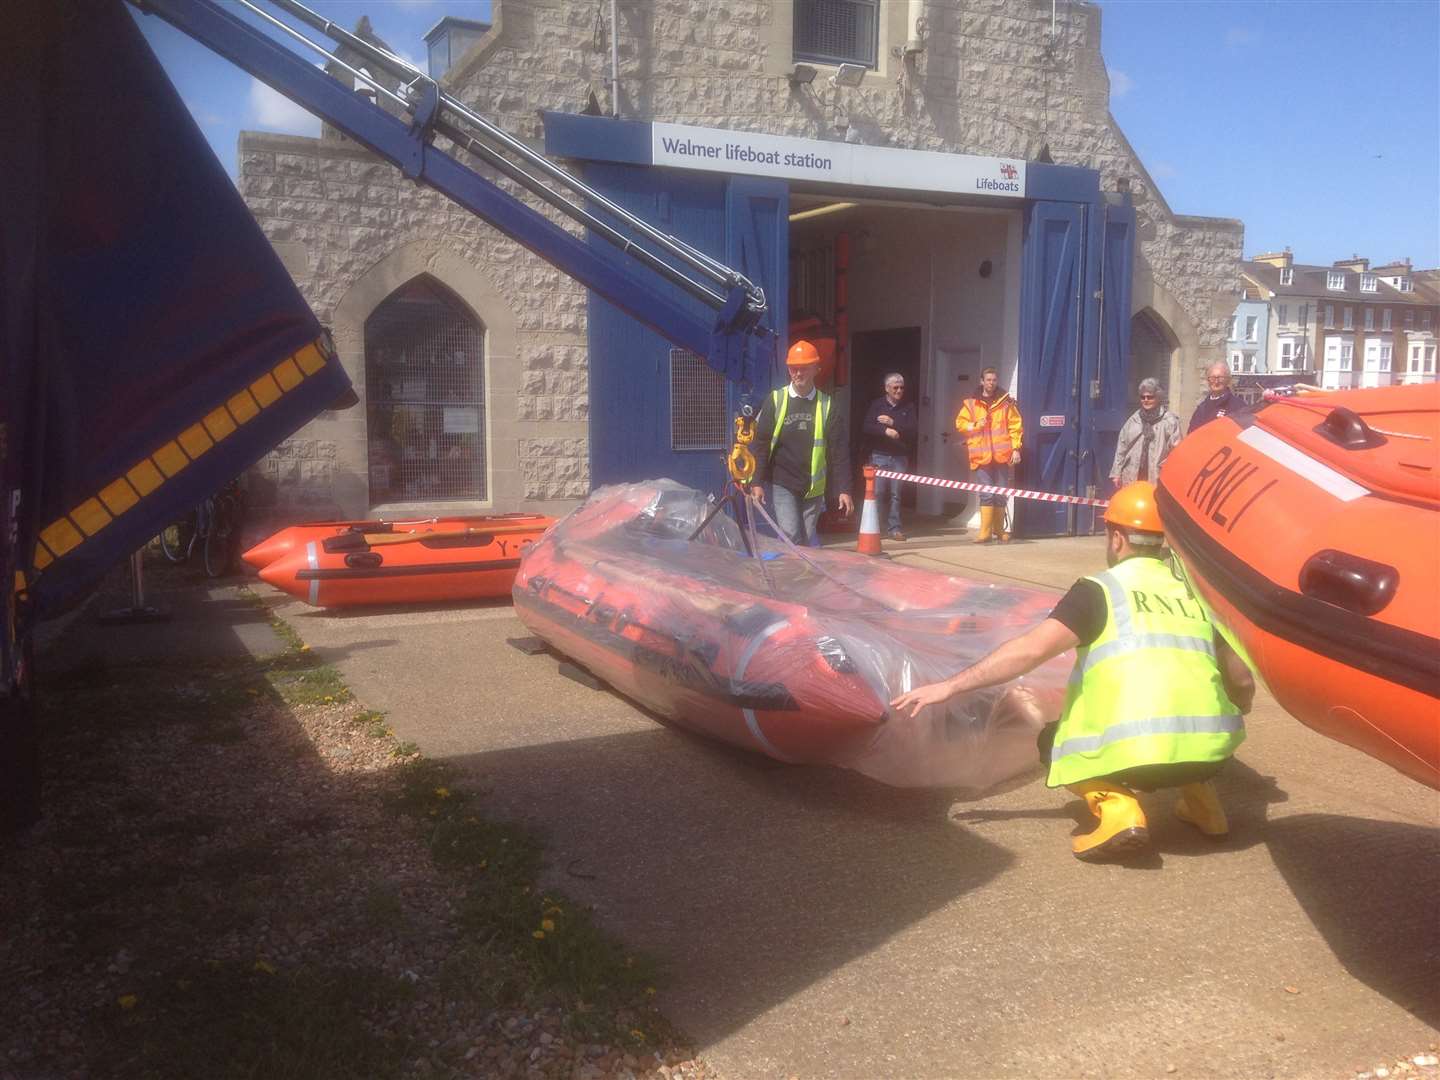 D Class inflatable vessell Duggie Rodbard II arrives at Walmer Lifeboat Station packed in plastic